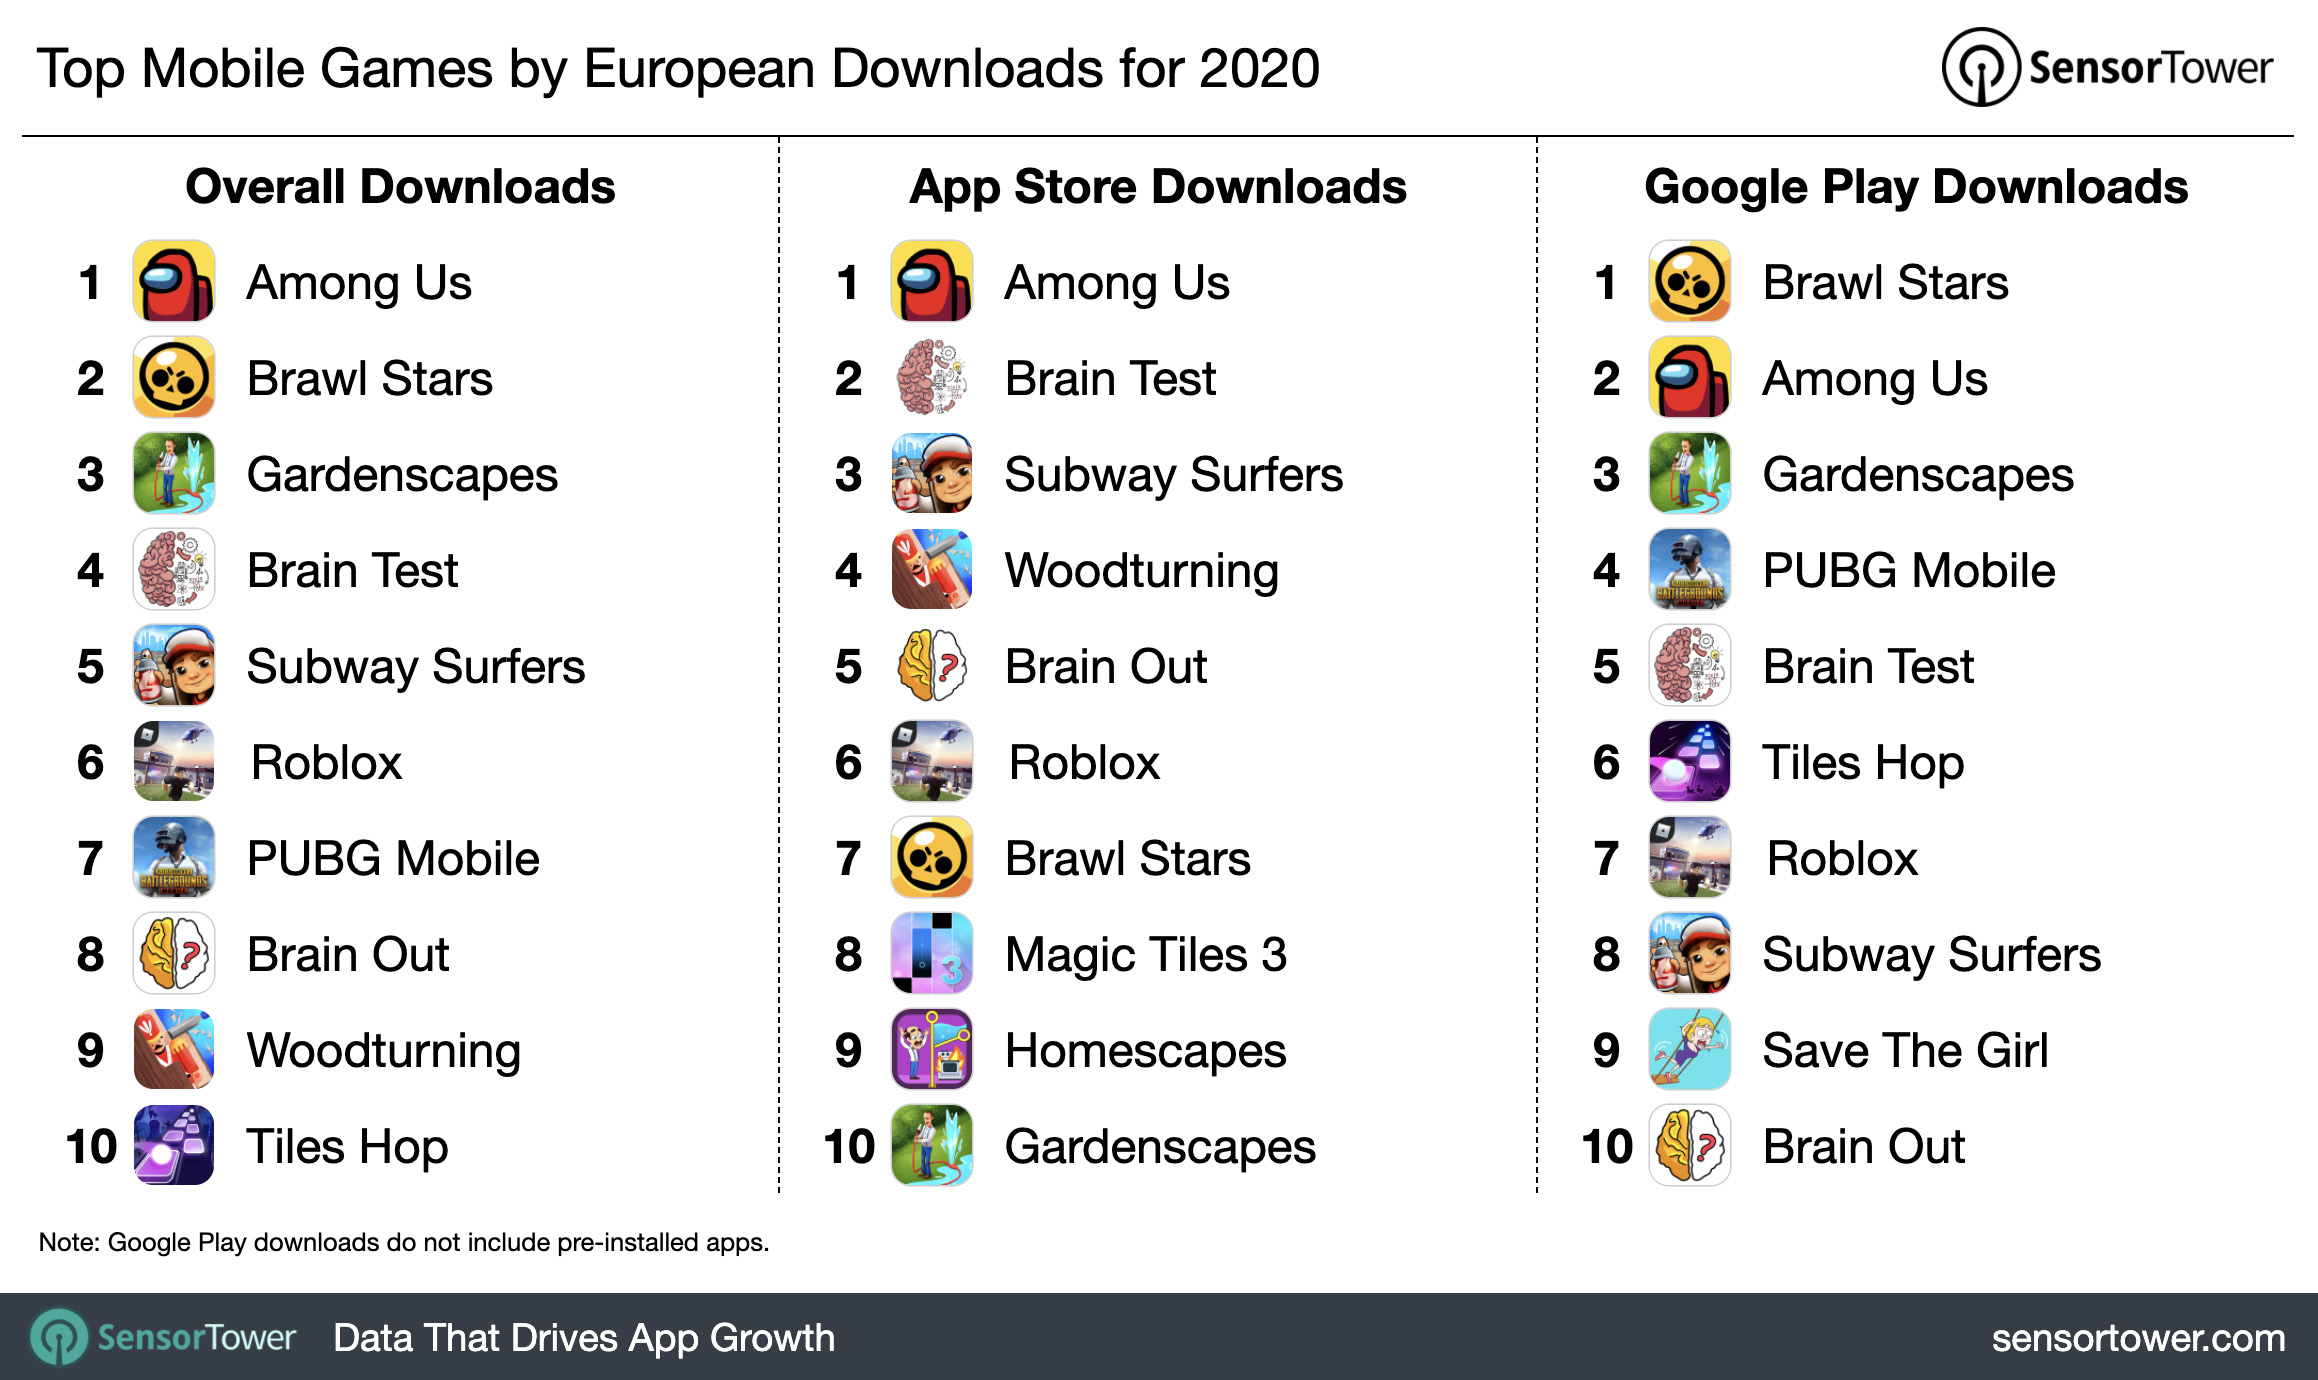 Top Mobile Games by European Downloads for 2020